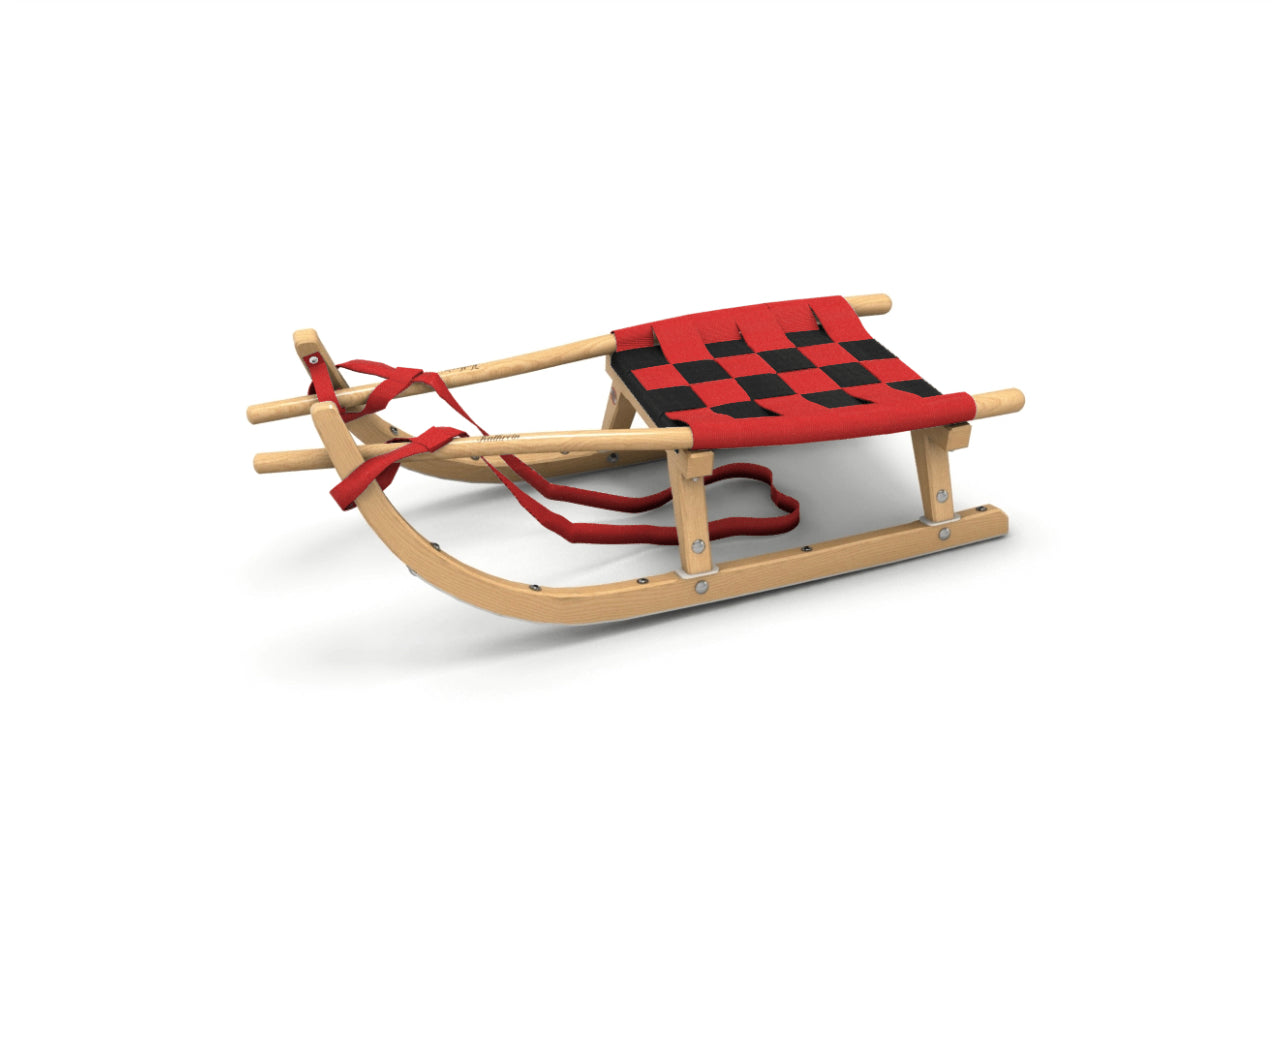 Toboggan (90cm) with belt seat from approx. 6 years of age